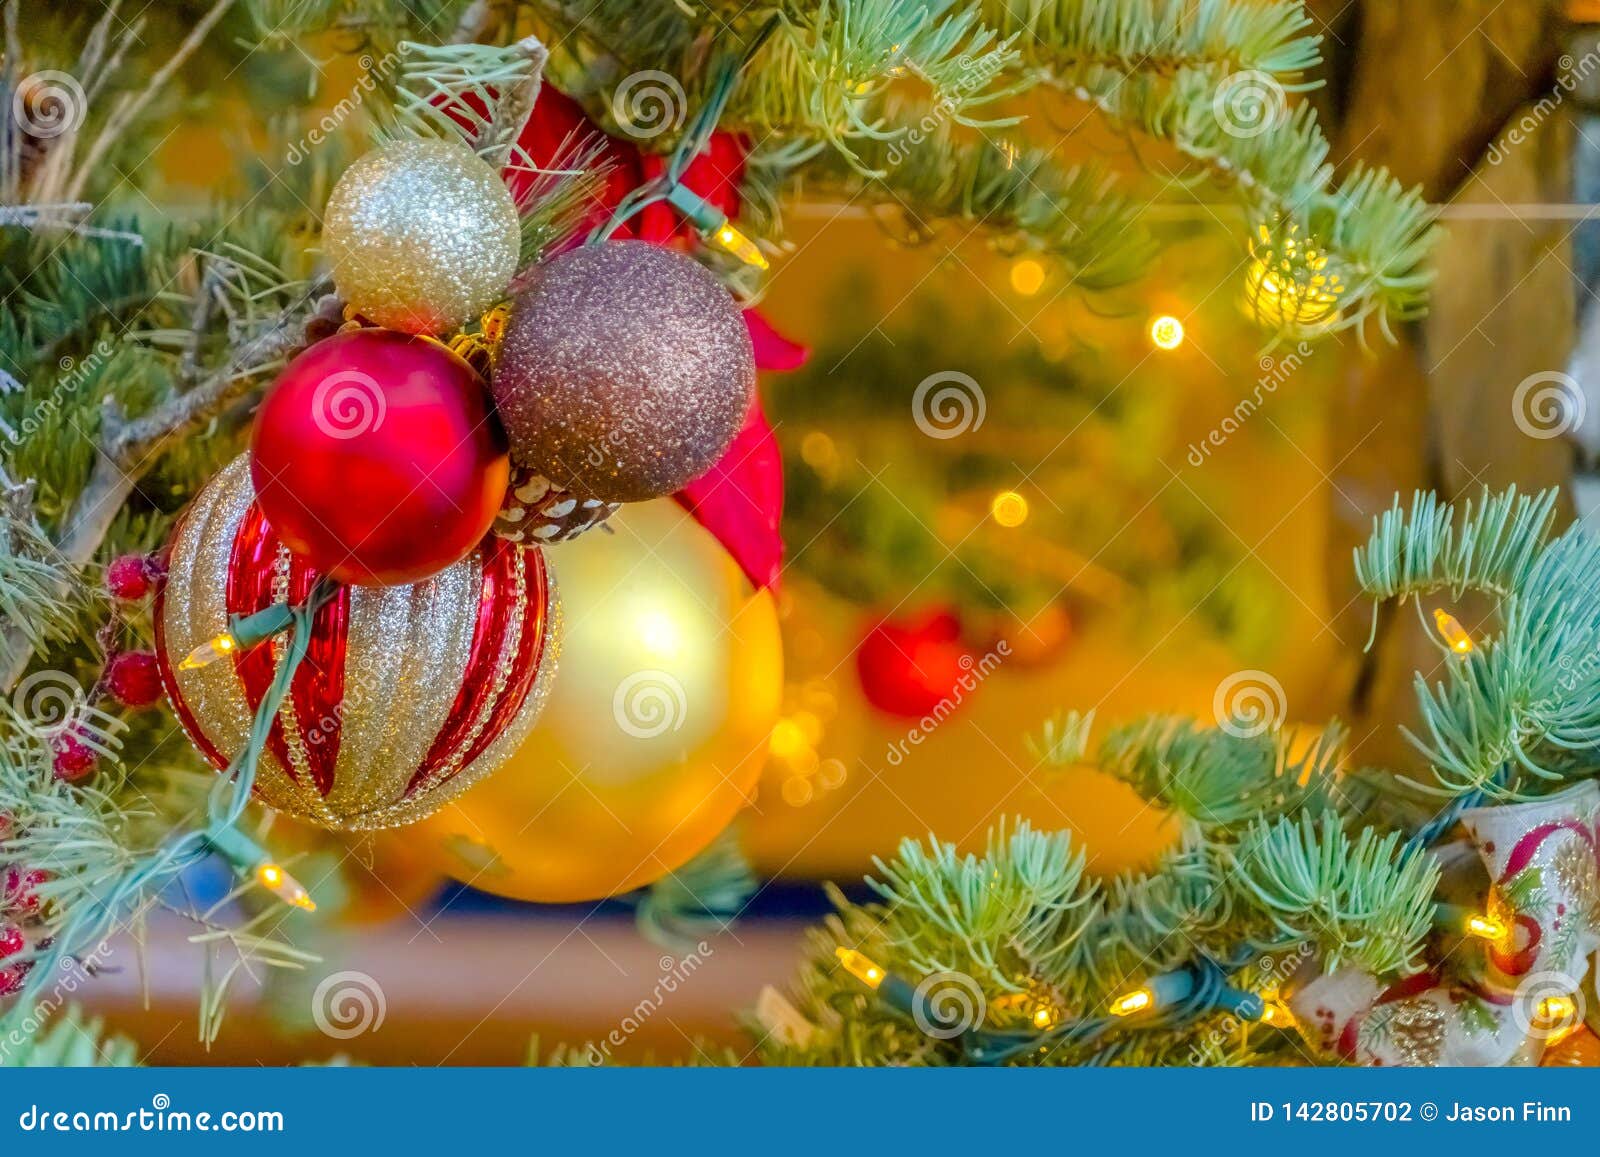 Shimmering Baubles and Lights on a Christmas Tree Stock Photo - Image ...